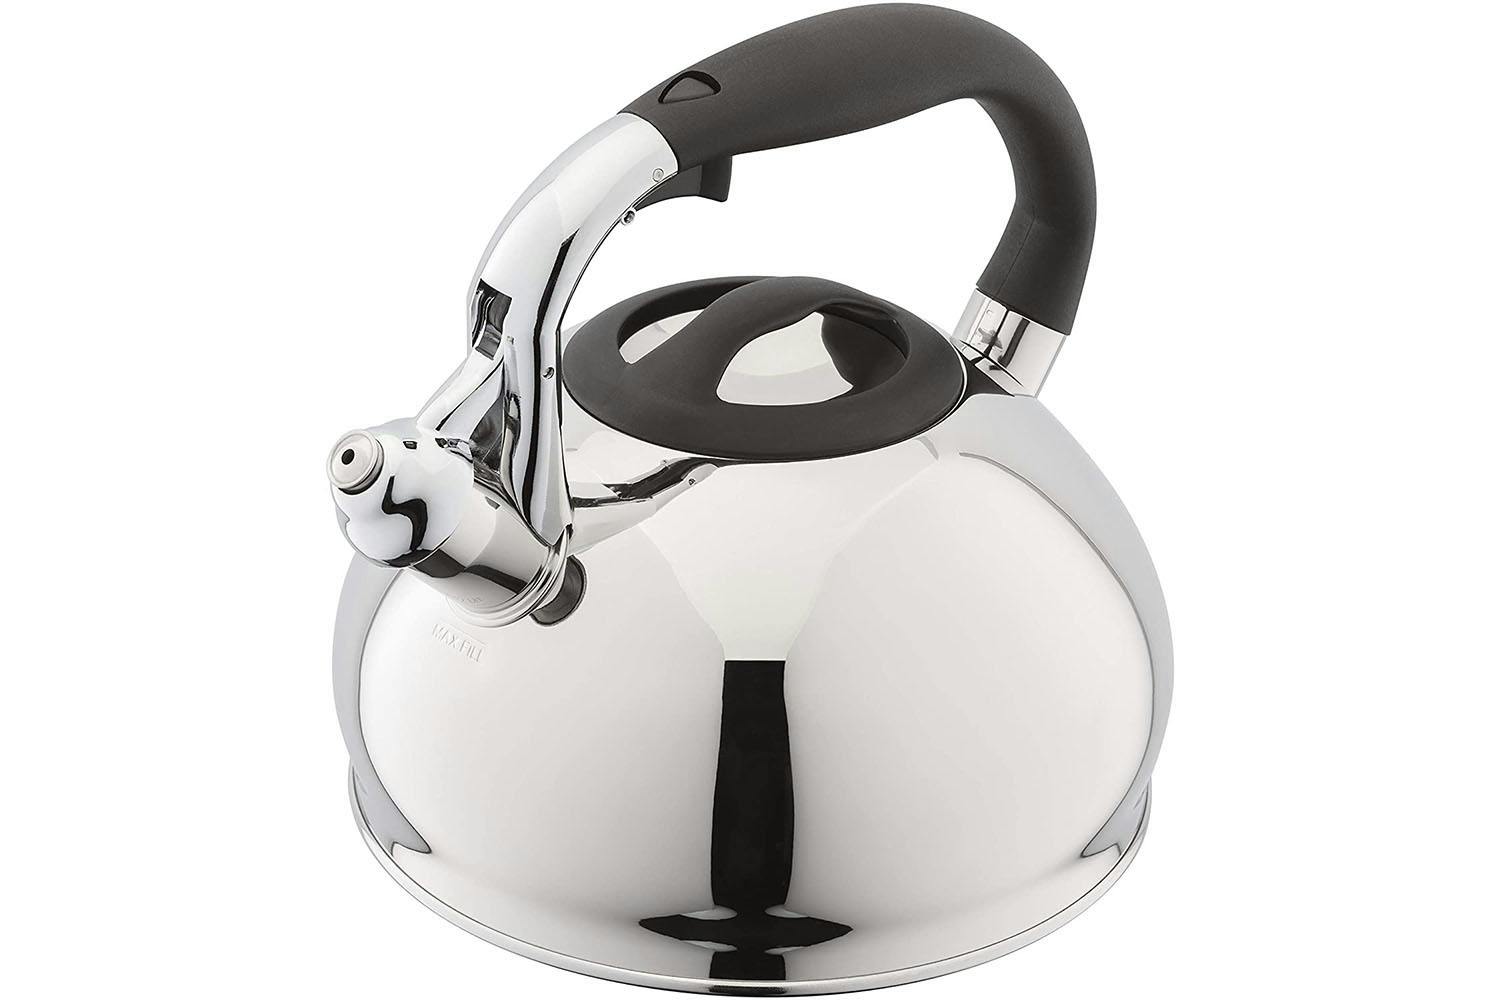 Stainless Steel Whistling Tea Kettle Water Boiler Jug 3L for Boiling Water